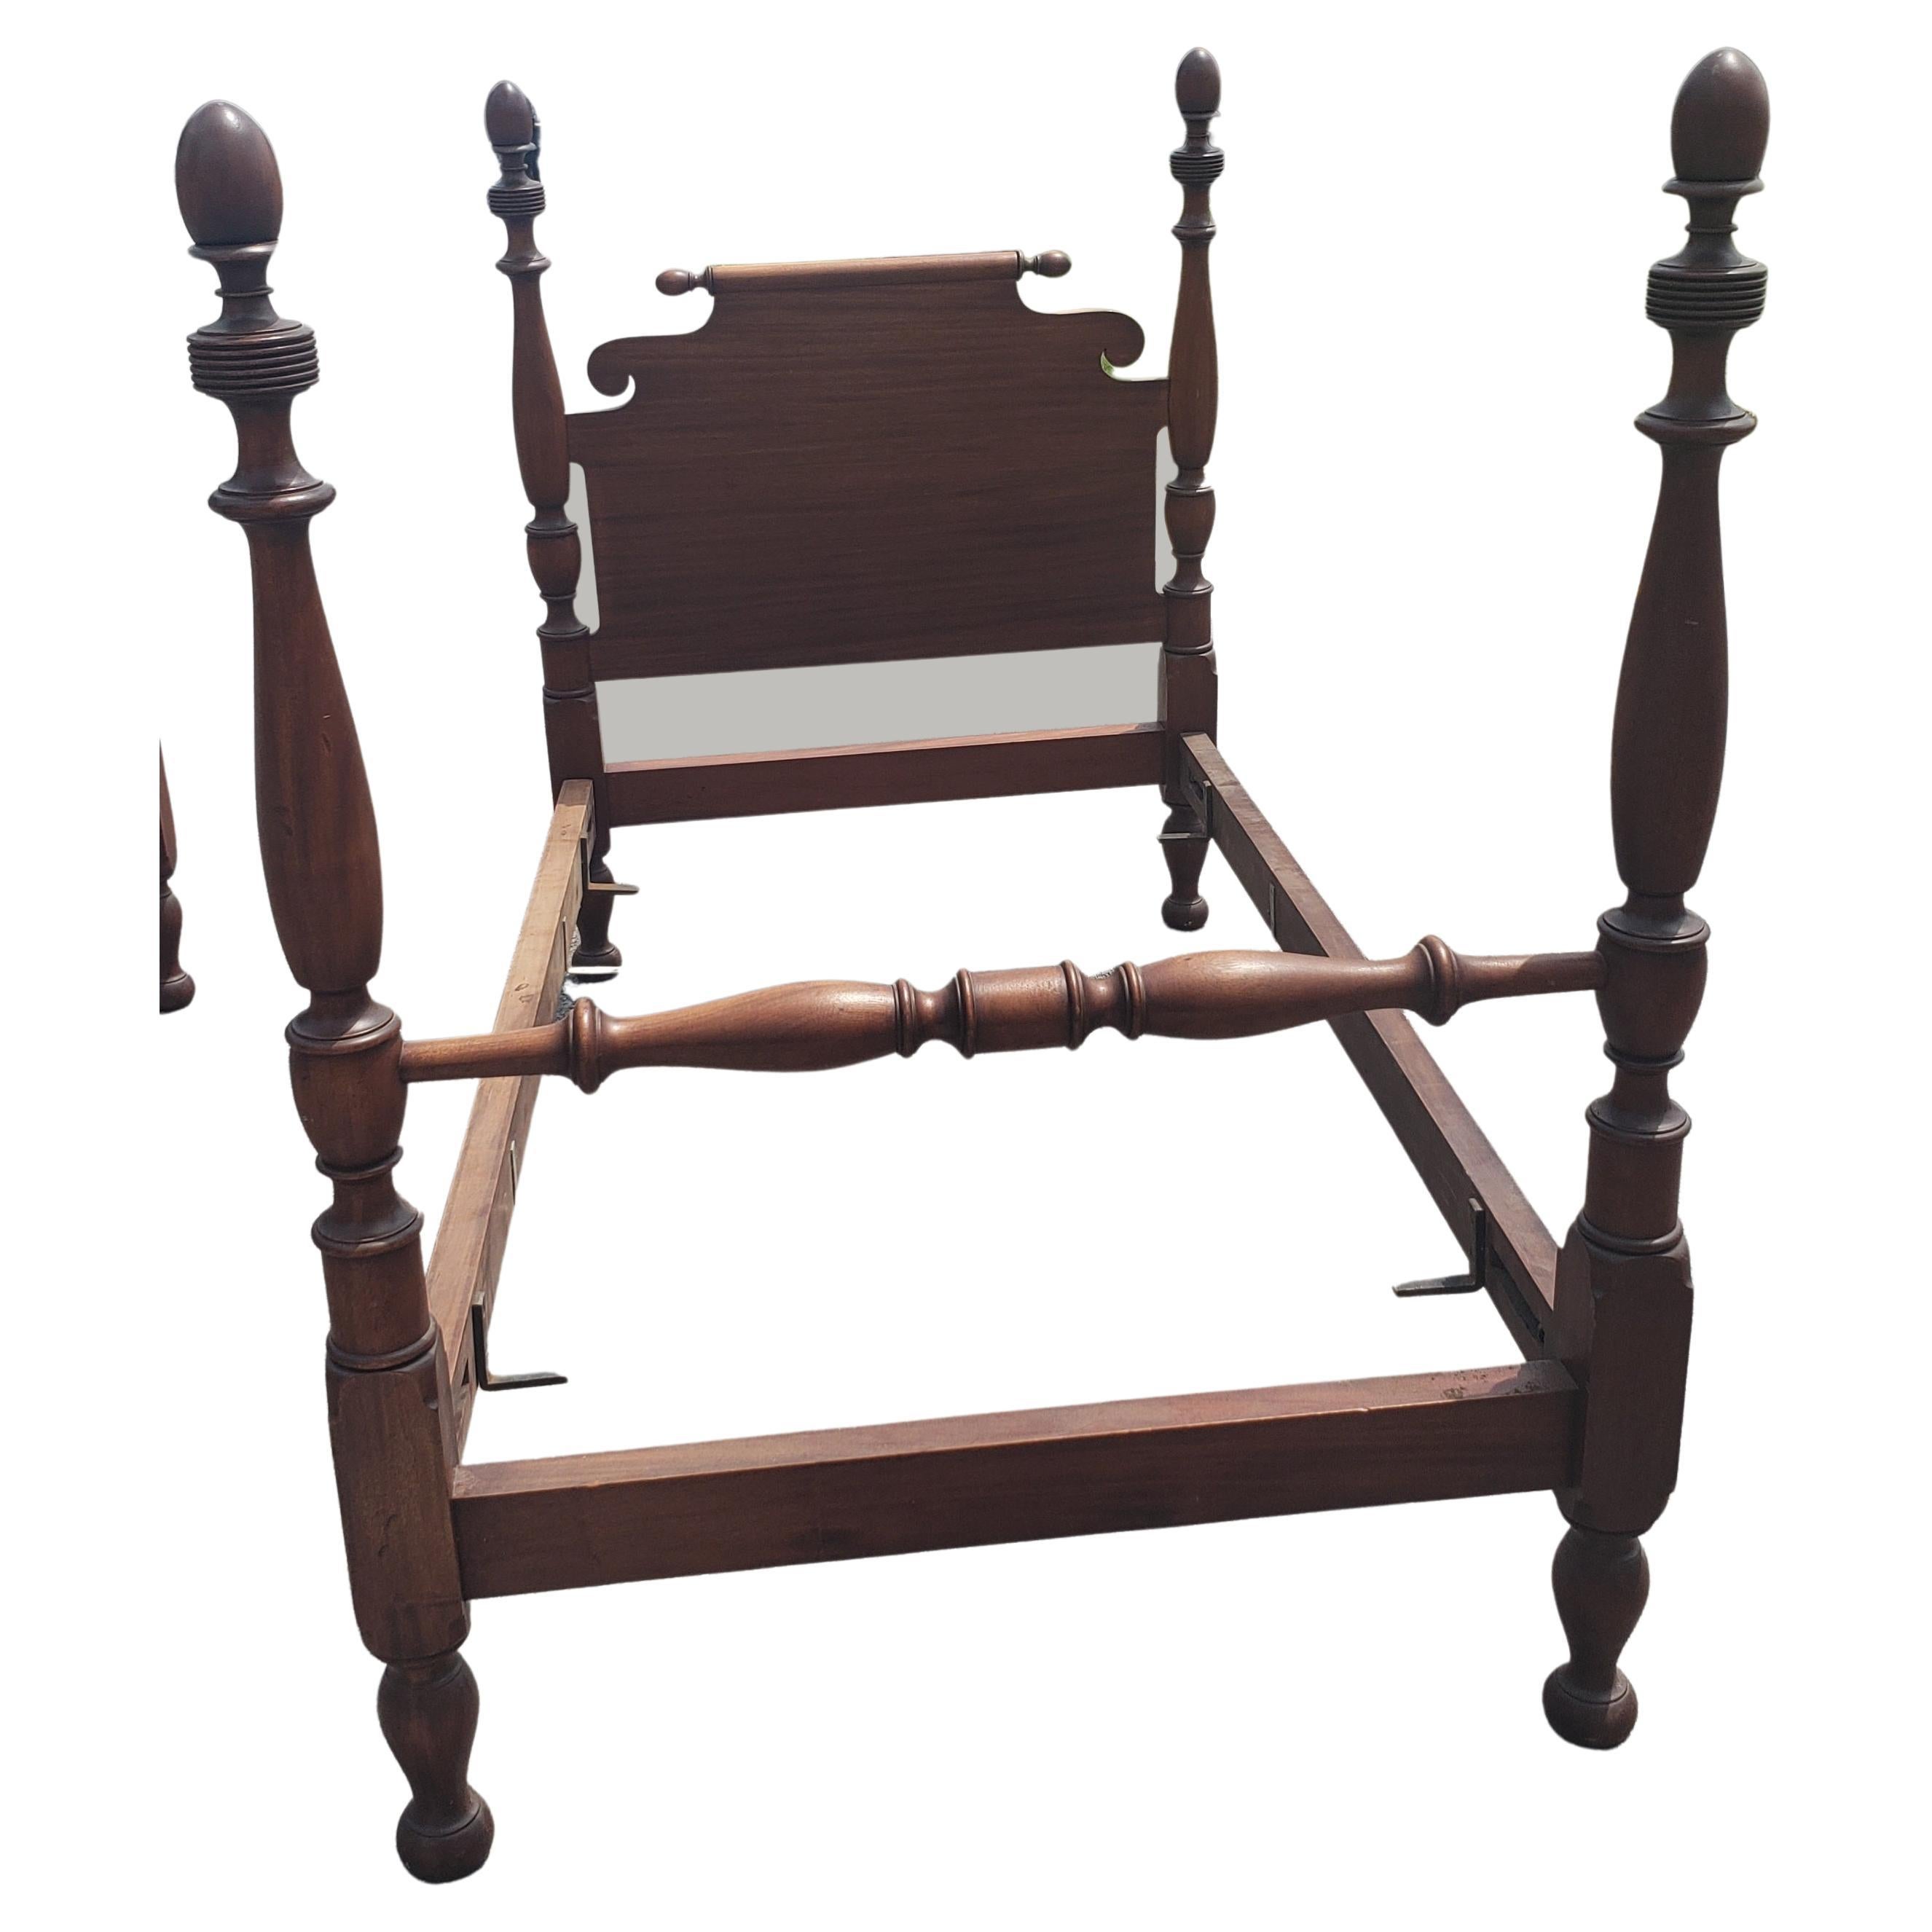 Hand-Crafted Early 20th Century American Empire Mahogany Semi-Post Twin Bedframes, a Pair